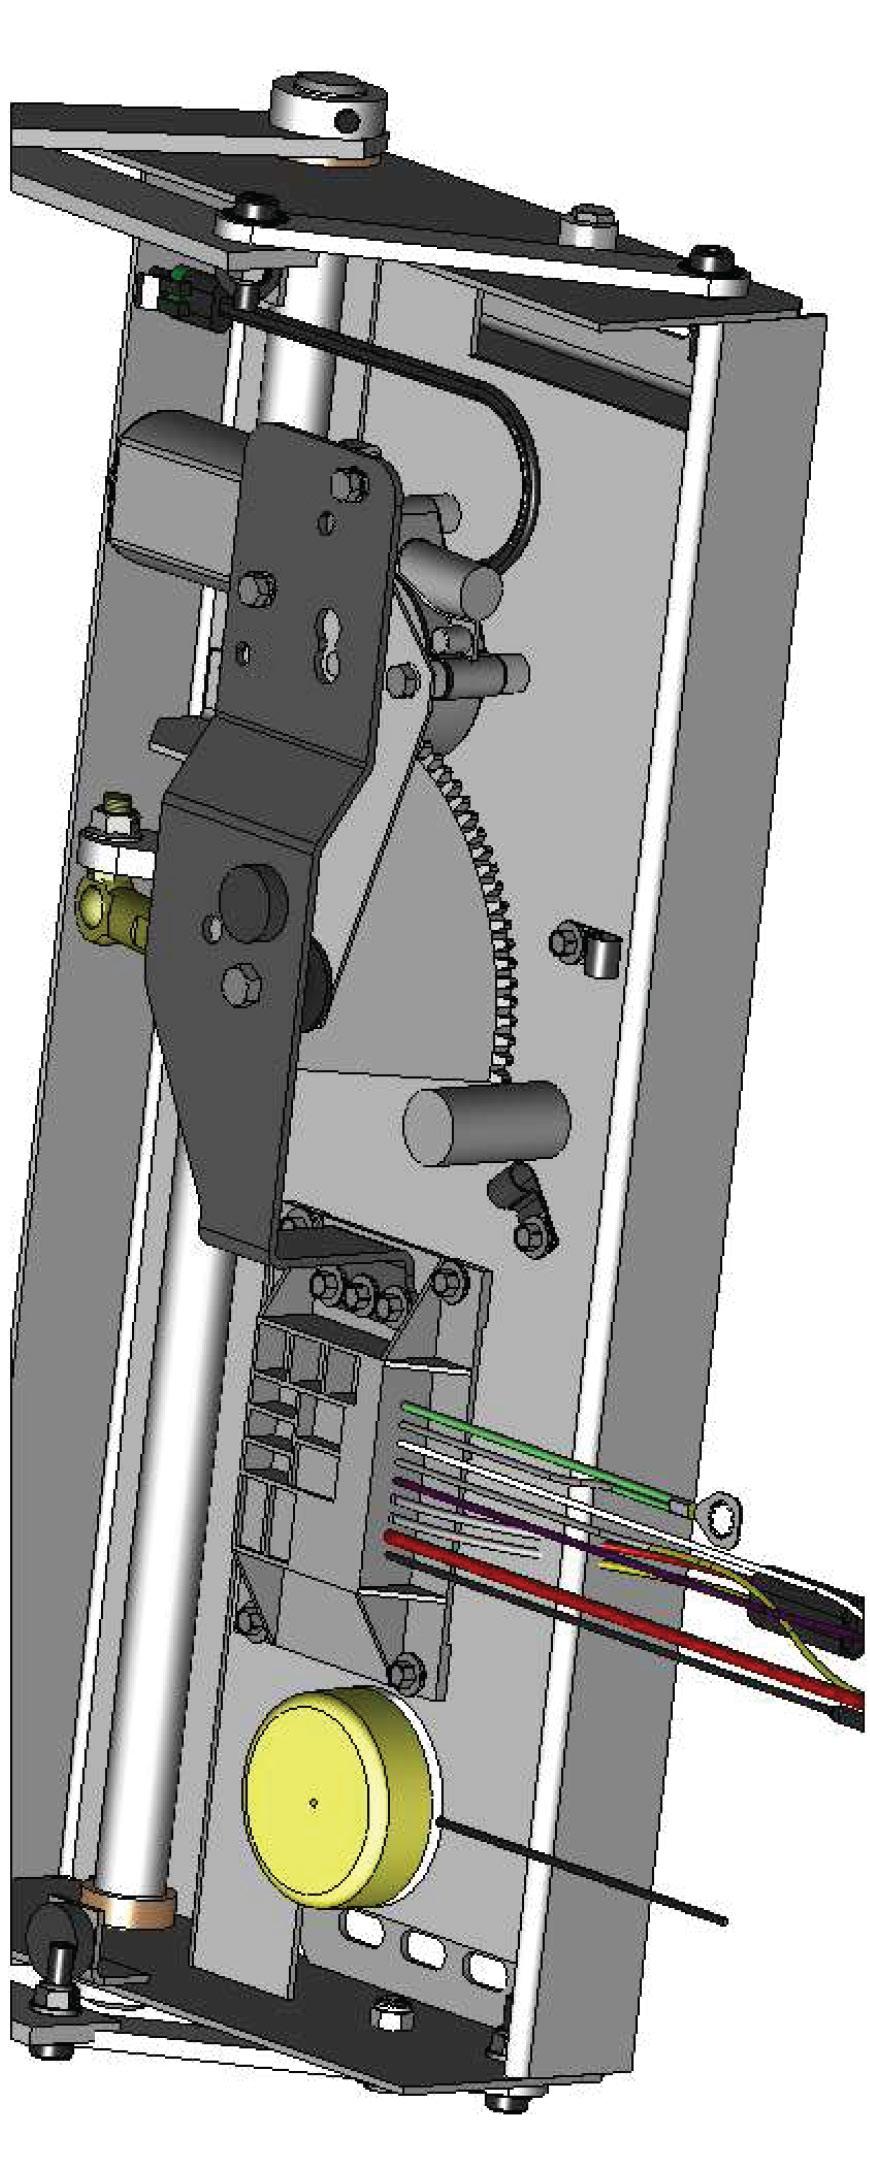 OHSTEP TRIPLE STEP RELL REPIR INSTRUTIONS Installing the Retainer racket ssembly 1. lean any dirt or debris from the hex socket on the fan gear shoulder bolt (if necessary) (Fig. 13G). 2.